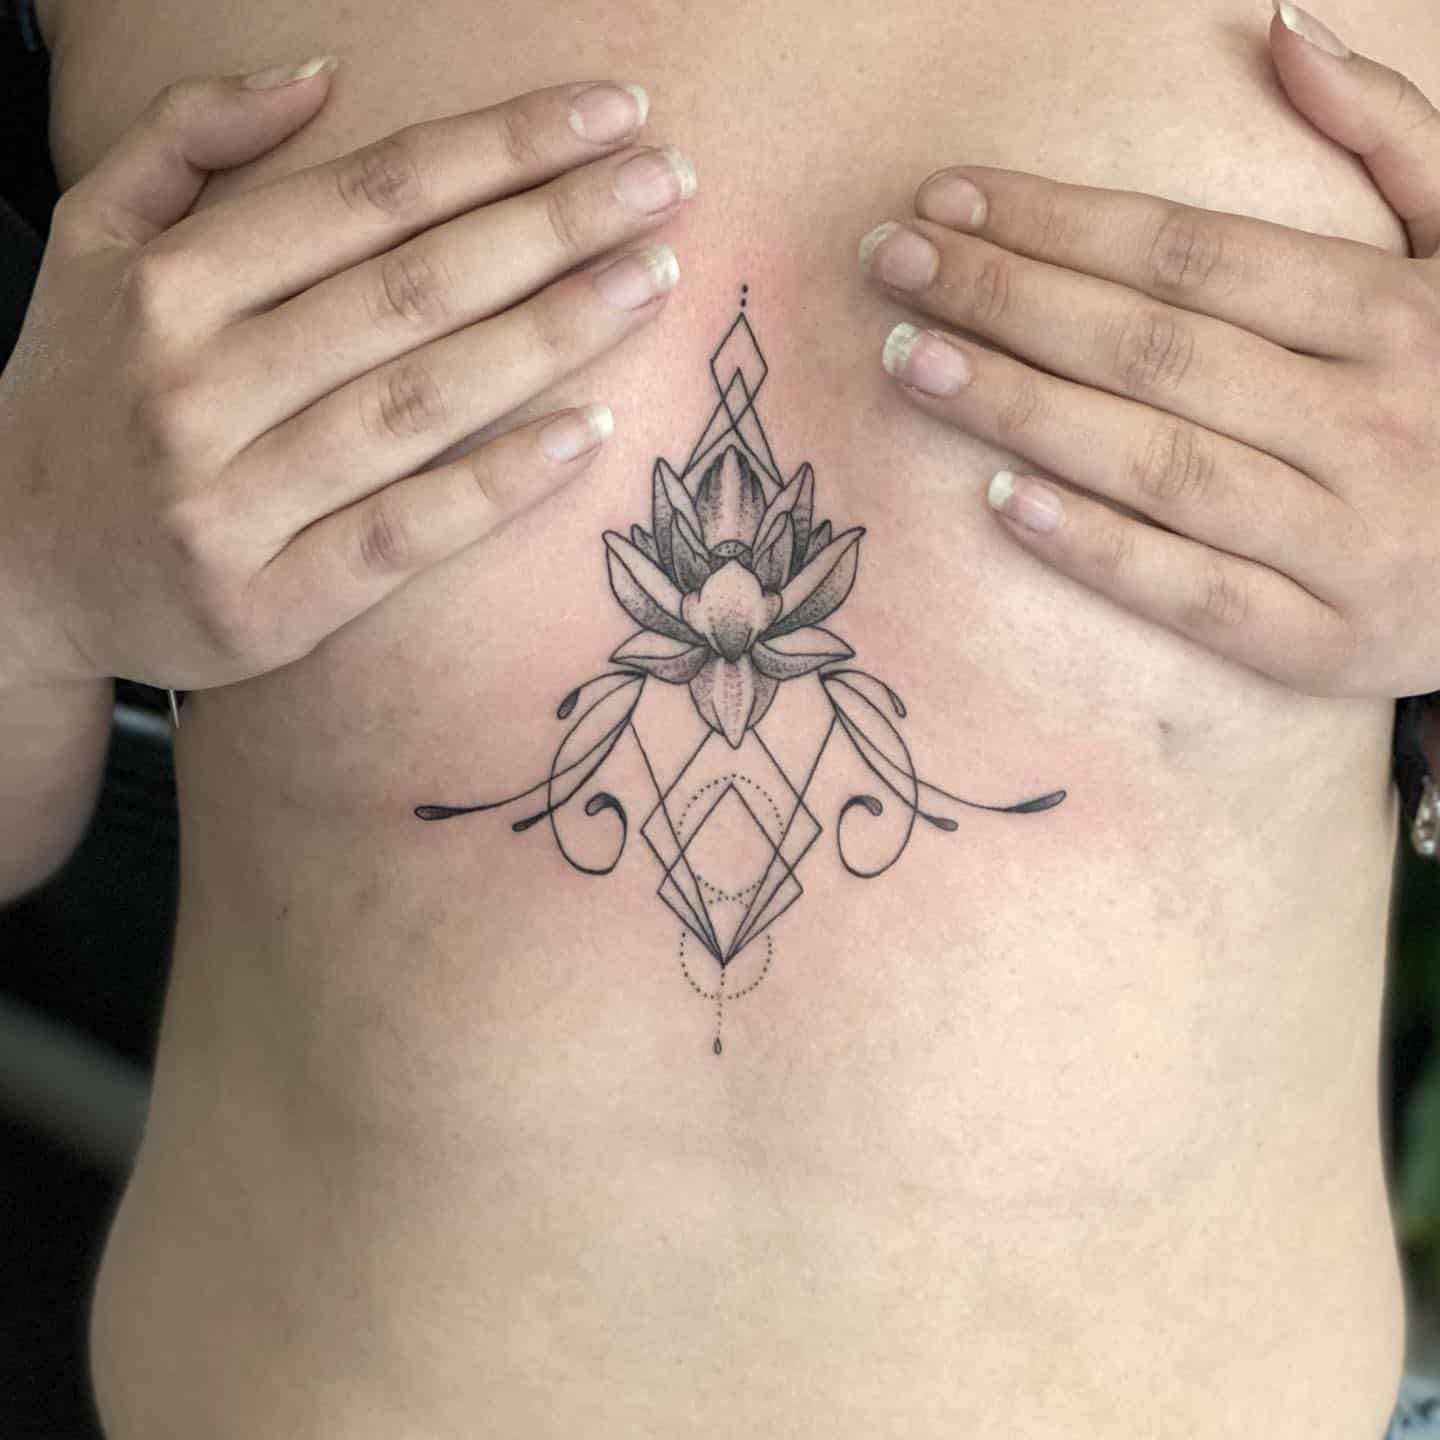 Sternum tattoo meaning